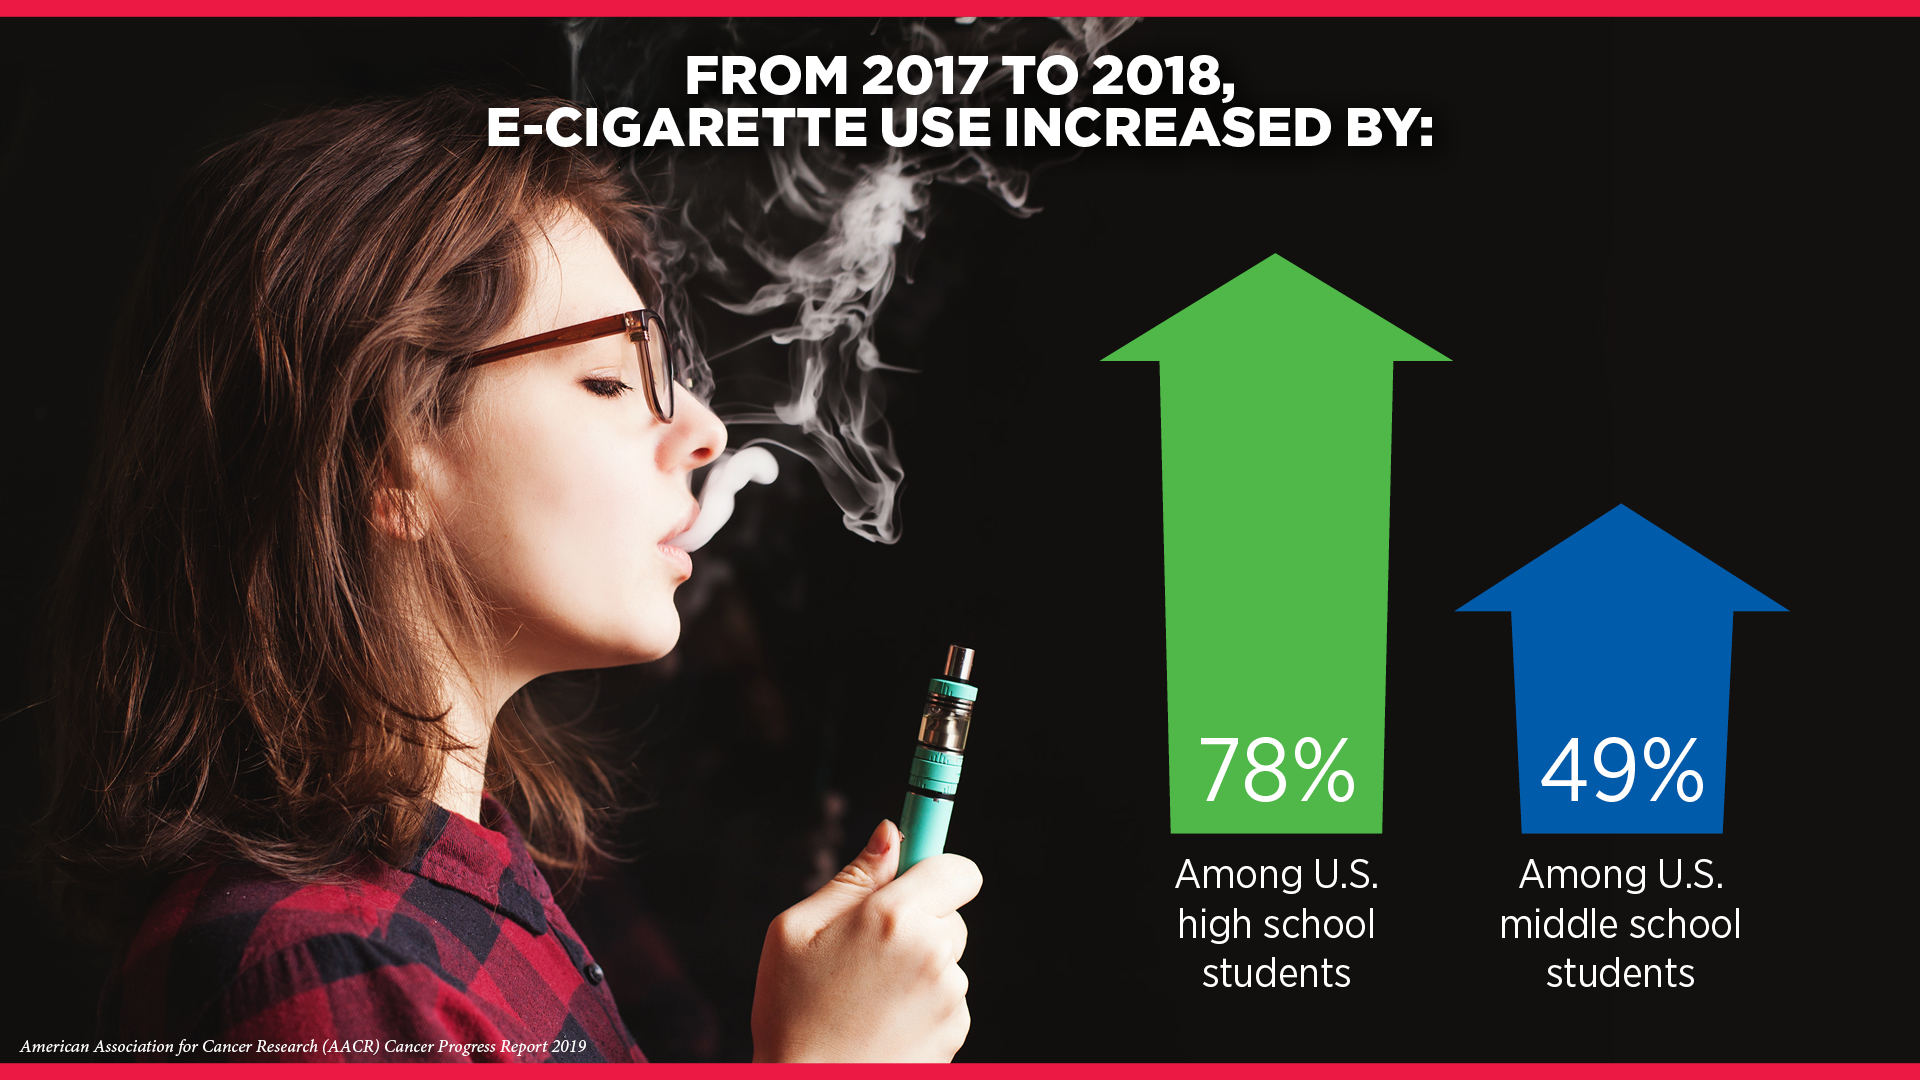 E-cigarette use by youth increased drastically in the past year: 78% among high school students and 49% among middle school students